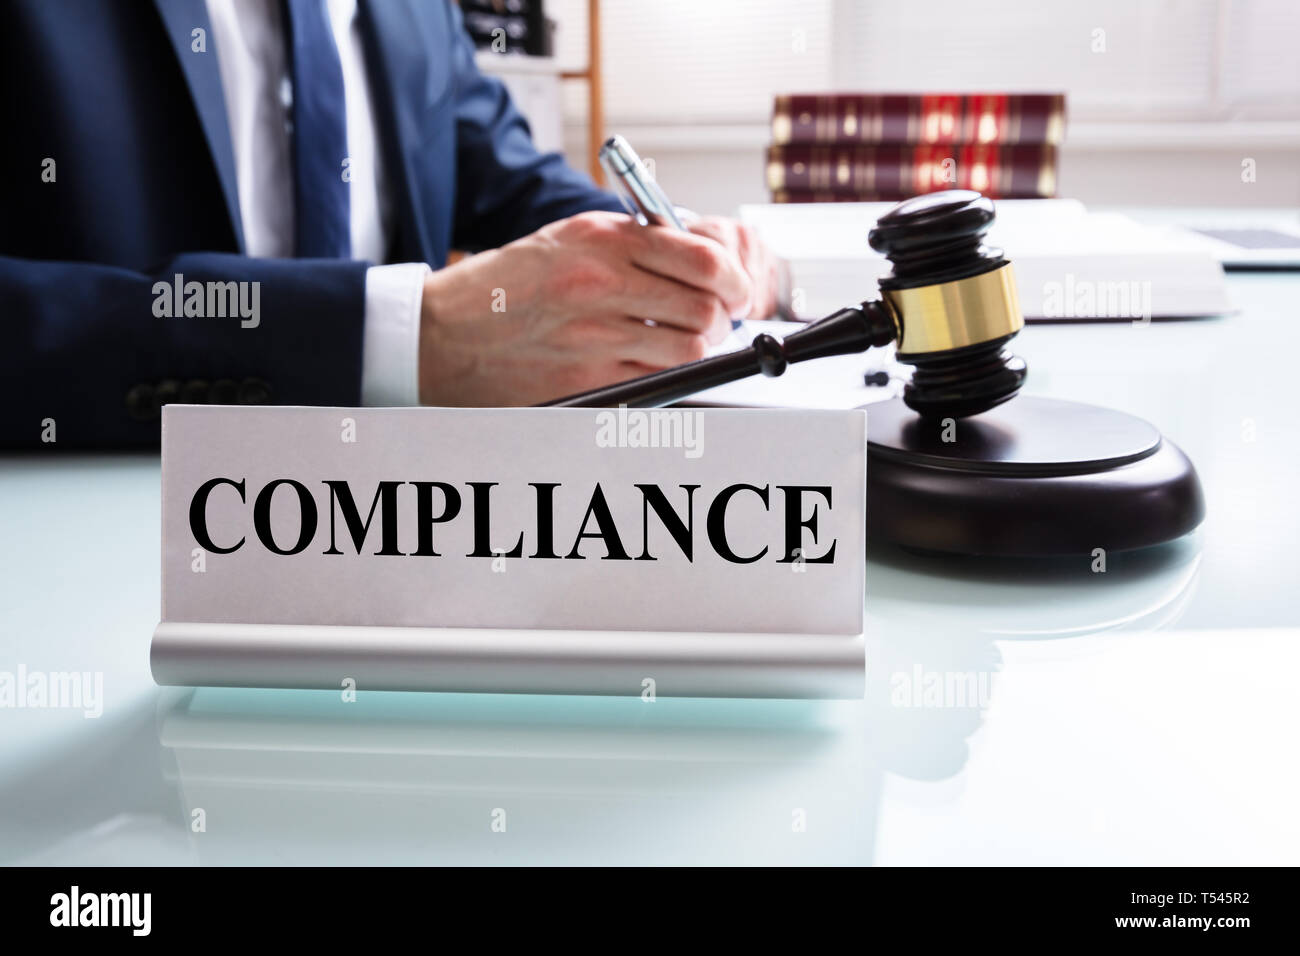 Compliance Name Plate Over Reflected Desk Near Gavel And Justice In Courtroom Stock Photo